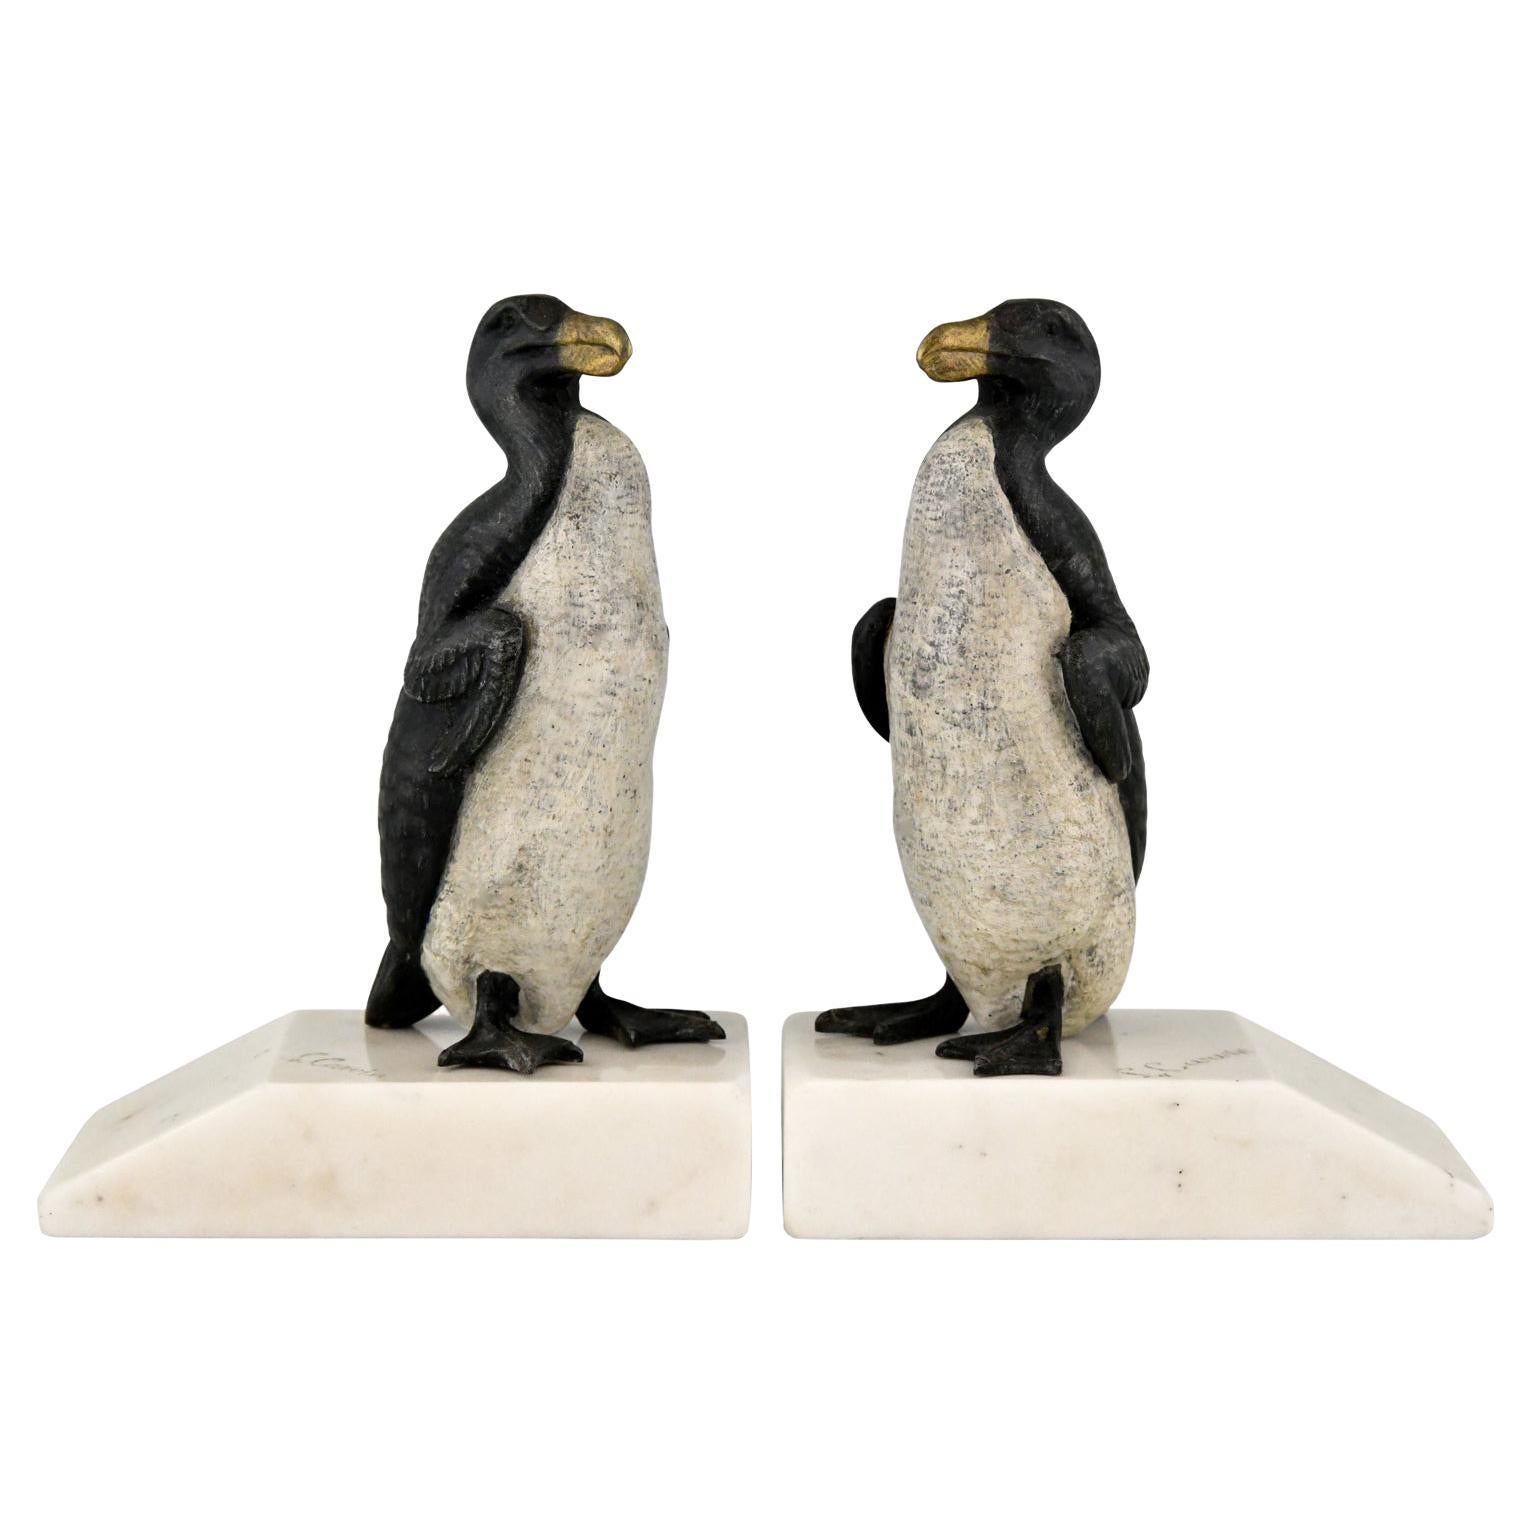 Art Deco Great Auk Penguin Bookends by Carvin France 1930